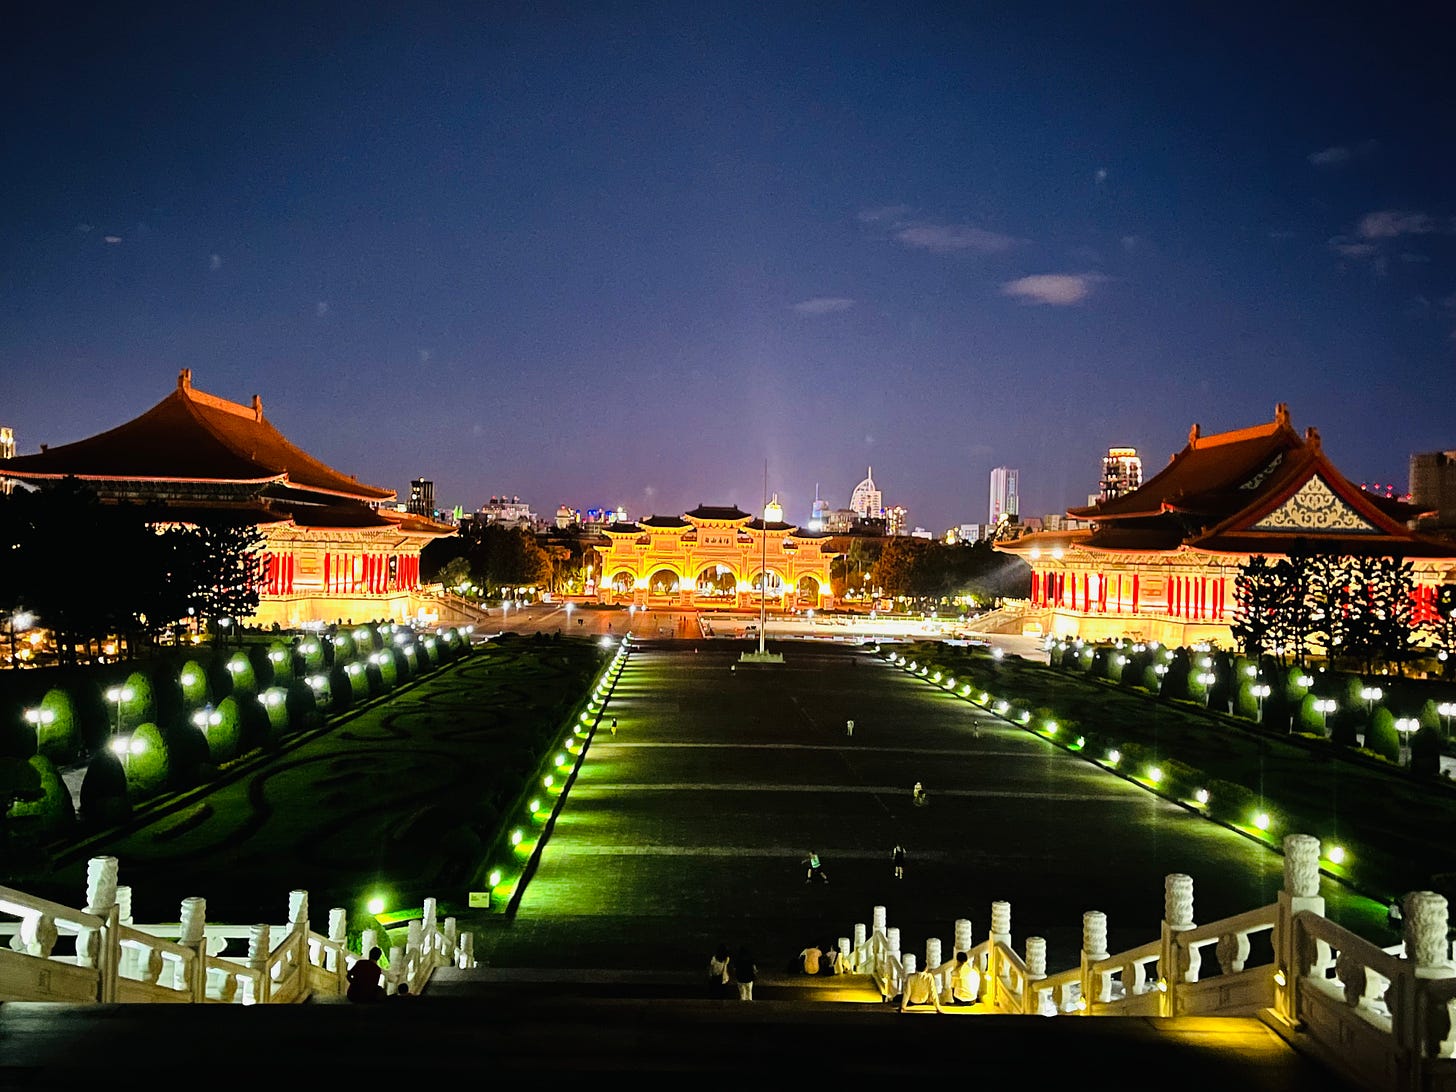 Two almost-identical performance halls, built in the style of Chinese palaces, flank a dark boulevard that ends at a grand white archway with upturned eaves. Everything is brightly illuminated for nighttime visitors.